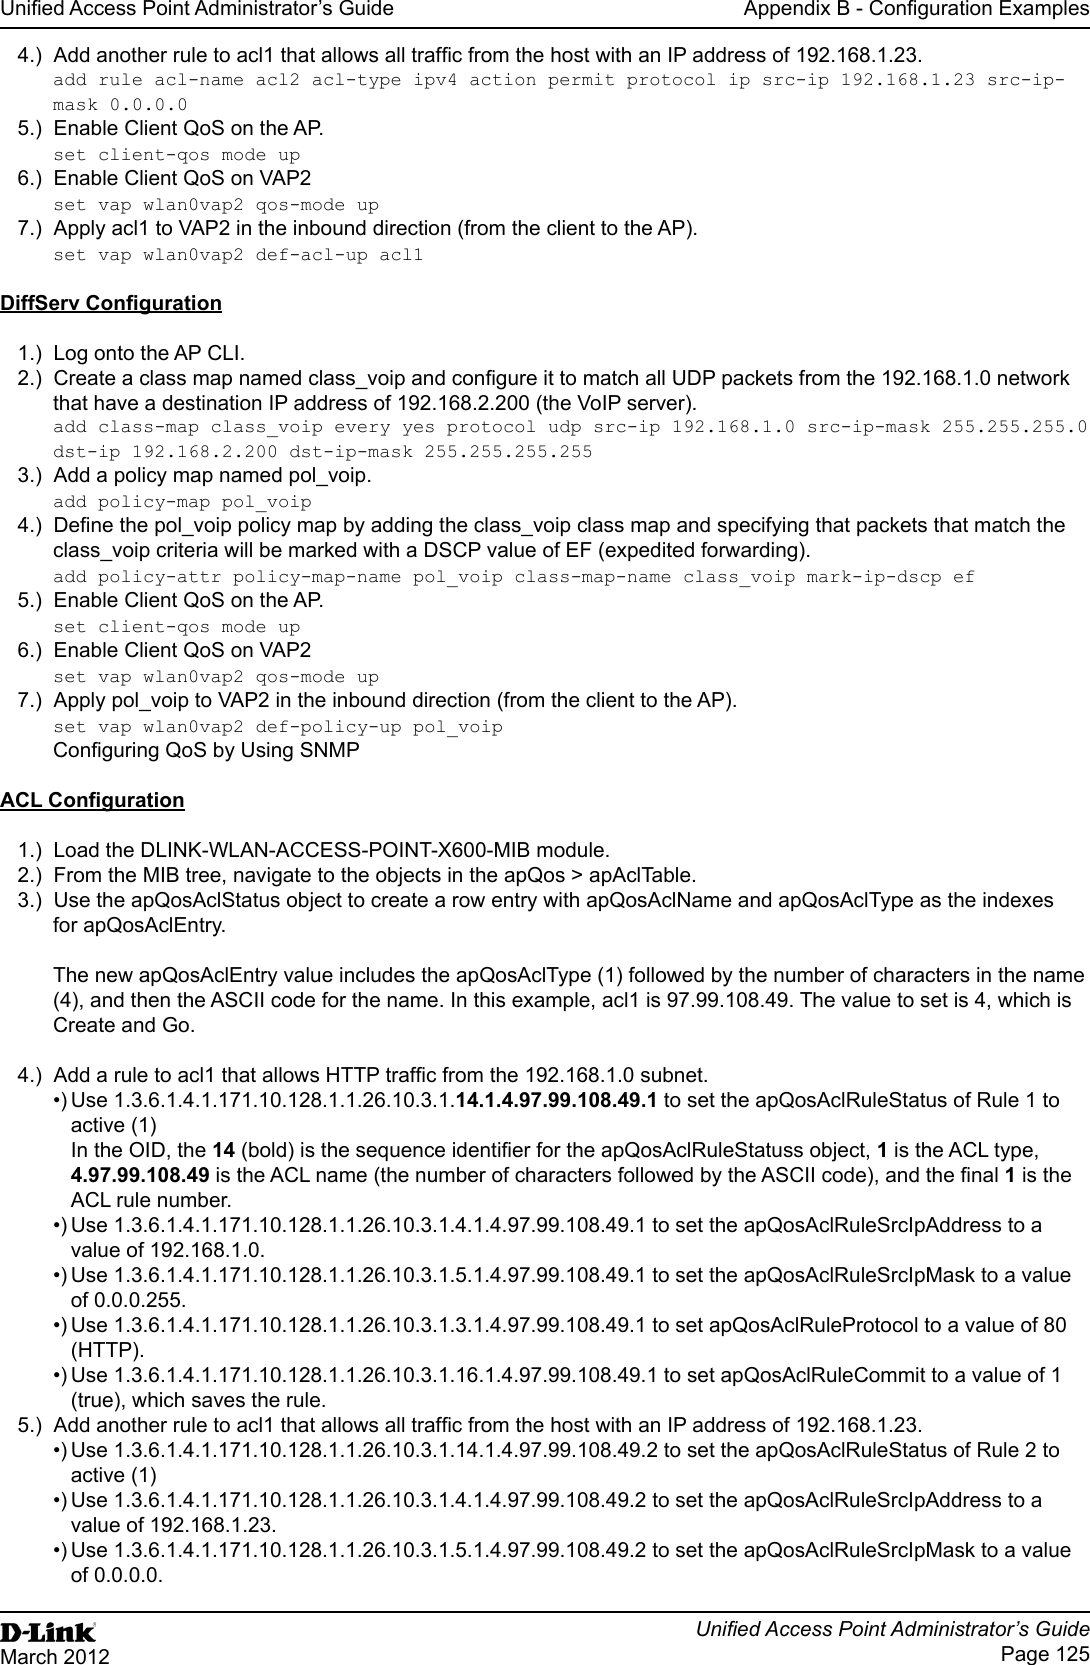 Unied Access Point Administrator’s GuideUnied Access Point Administrator’s GuidePage 125March 2012Appendix B - Conguration Examples4.)  Add another rule to acl1 that allows all trafc from the host with an IP address of 192.168.1.23. add rule acl-name acl2 acl-type ipv4 action permit protocol ip src-ip 192.168.1.23 src-ip-mask 0.0.0.05.)  Enable Client QoS on the AP.set client-qos mode up6.)  Enable Client QoS on VAP2set vap wlan0vap2 qos-mode up7.)  Apply acl1 to VAP2 in the inbound direction (from the client to the AP). set vap wlan0vap2 def-acl-up acl1 DiffServ Conguration1.)  Log onto the AP CLI.2.)  Create a class map named class_voip and congure it to match all UDP packets from the 192.168.1.0 network that have a destination IP address of 192.168.2.200 (the VoIP server). add class-map class_voip every yes protocol udp src-ip 192.168.1.0 src-ip-mask 255.255.255.0 dst-ip 192.168.2.200 dst-ip-mask 255.255.255.255 3.)  Add a policy map named pol_voip.add policy-map pol_voip4.)  Dene the pol_voip policy map by adding the class_voip class map and specifying that packets that match the class_voip criteria will be marked with a DSCP value of EF (expedited forwarding).add policy-attr policy-map-name pol_voip class-map-name class_voip mark-ip-dscp ef5.)  Enable Client QoS on the AP.set client-qos mode up6.)  Enable Client QoS on VAP2set vap wlan0vap2 qos-mode up7.)  Apply pol_voip to VAP2 in the inbound direction (from the client to the AP). set vap wlan0vap2 def-policy-up pol_voip Conguring QoS by Using SNMPACL Conguration1.)  Load the DLINK-WLAN-ACCESS-POINT-X600-MIB module.2.)  From the MIB tree, navigate to the objects in the apQos &gt; apAclTable.3.)  Use the apQosAclStatus object to create a row entry with apQosAclName and apQosAclType as the indexes for apQosAclEntry.The new apQosAclEntry value includes the apQosAclType (1) followed by the number of characters in the name (4), and then the ASCII code for the name. In this example, acl1 is 97.99.108.49. The value to set is 4, which is Create and Go.4.)  Add a rule to acl1 that allows HTTP trafc from the 192.168.1.0 subnet. •) Use 1.3.6.1.4.1.171.10.128.1.1.26.10.3.1.14.1.4.97.99.108.49.1 to set the apQosAclRuleStatus of Rule 1 to active (1)In the OID, the 14 (bold) is the sequence identier for the apQosAclRuleStatuss object, 1 is the ACL type, 4.97.99.108.49 is the ACL name (the number of characters followed by the ASCII code), and the nal 1 is the ACL rule number.•) Use 1.3.6.1.4.1.171.10.128.1.1.26.10.3.1.4.1.4.97.99.108.49.1 to set the apQosAclRuleSrcIpAddress to a value of 192.168.1.0.•) Use 1.3.6.1.4.1.171.10.128.1.1.26.10.3.1.5.1.4.97.99.108.49.1 to set the apQosAclRuleSrcIpMask to a value of 0.0.0.255.•) Use 1.3.6.1.4.1.171.10.128.1.1.26.10.3.1.3.1.4.97.99.108.49.1 to set apQosAclRuleProtocol to a value of 80 (HTTP).•) Use 1.3.6.1.4.1.171.10.128.1.1.26.10.3.1.16.1.4.97.99.108.49.1 to set apQosAclRuleCommit to a value of 1 (true), which saves the rule.5.)  Add another rule to acl1 that allows all trafc from the host with an IP address of 192.168.1.23. •) Use 1.3.6.1.4.1.171.10.128.1.1.26.10.3.1.14.1.4.97.99.108.49.2 to set the apQosAclRuleStatus of Rule 2 to active (1)•) Use 1.3.6.1.4.1.171.10.128.1.1.26.10.3.1.4.1.4.97.99.108.49.2 to set the apQosAclRuleSrcIpAddress to a value of 192.168.1.23.•) Use 1.3.6.1.4.1.171.10.128.1.1.26.10.3.1.5.1.4.97.99.108.49.2 to set the apQosAclRuleSrcIpMask to a value of 0.0.0.0.